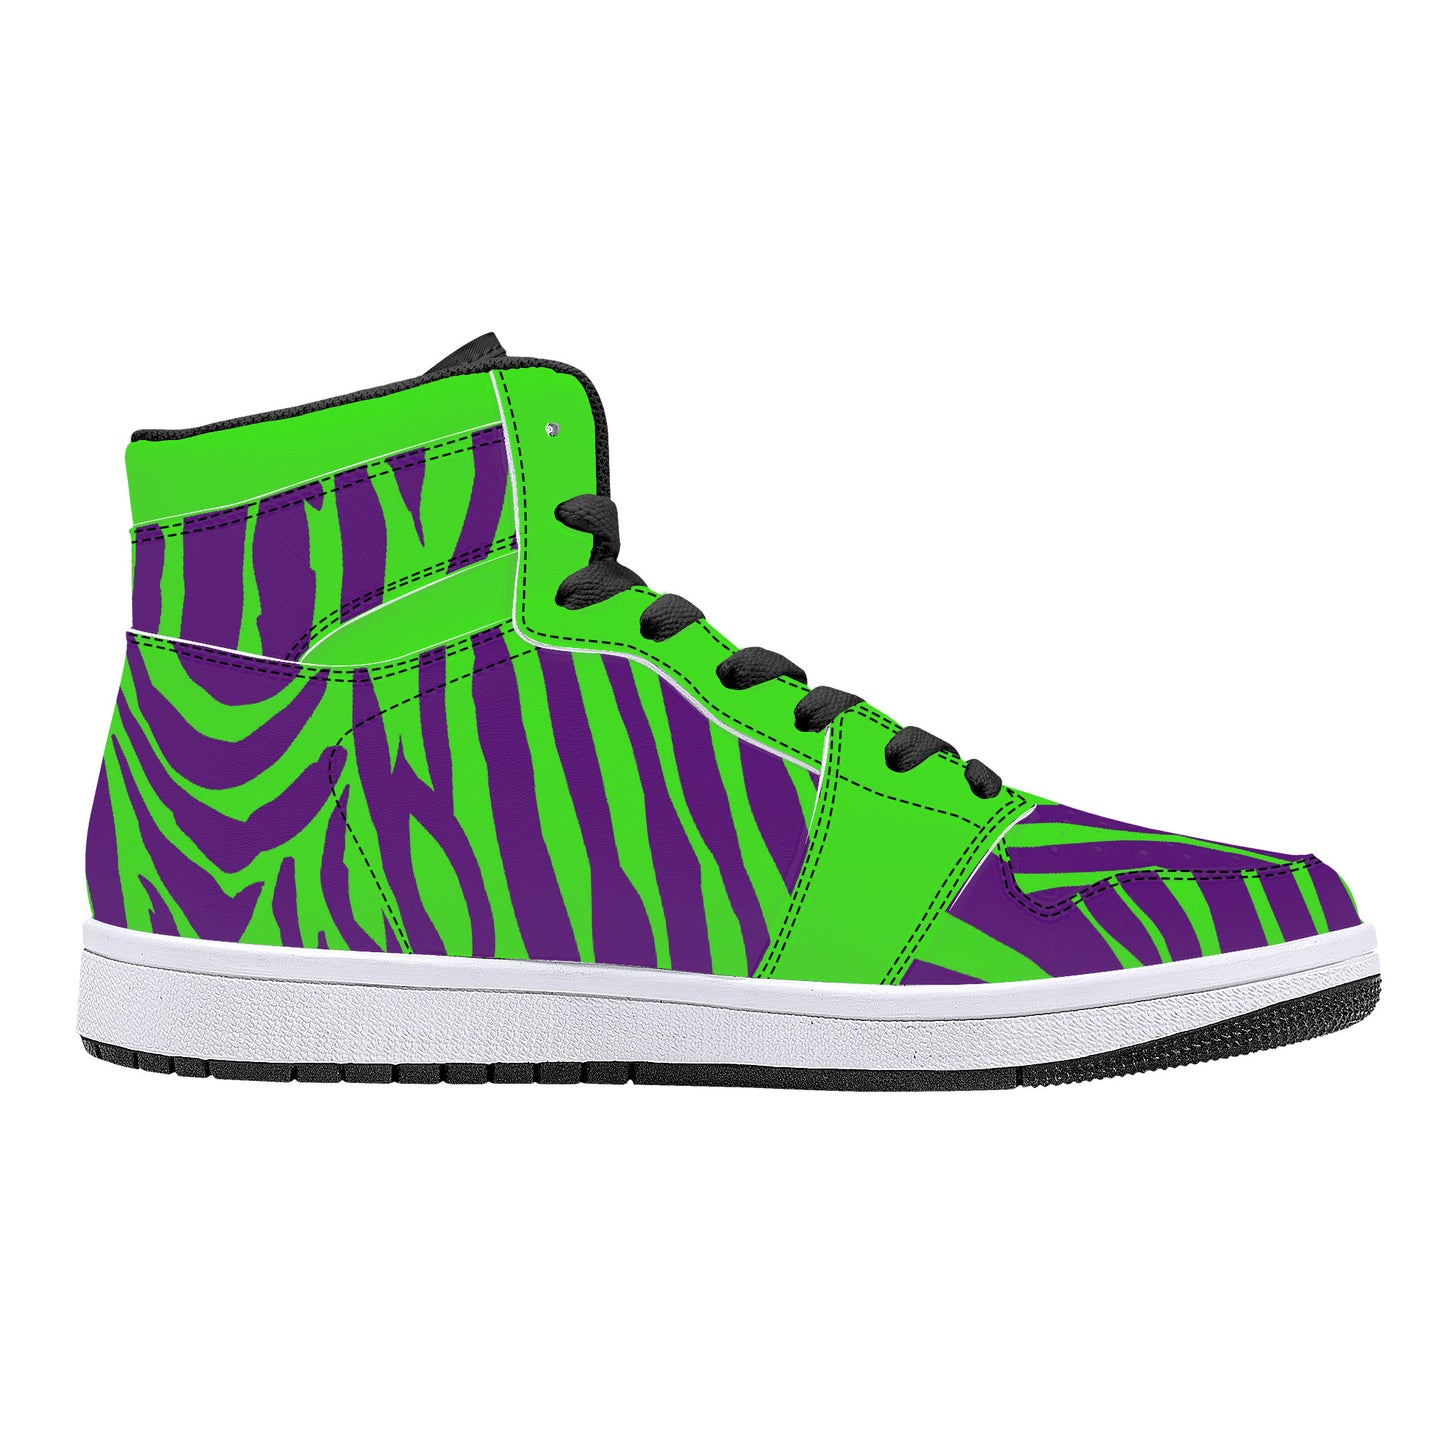 "Zebra" High-Top Synthetic Leather Sneakers